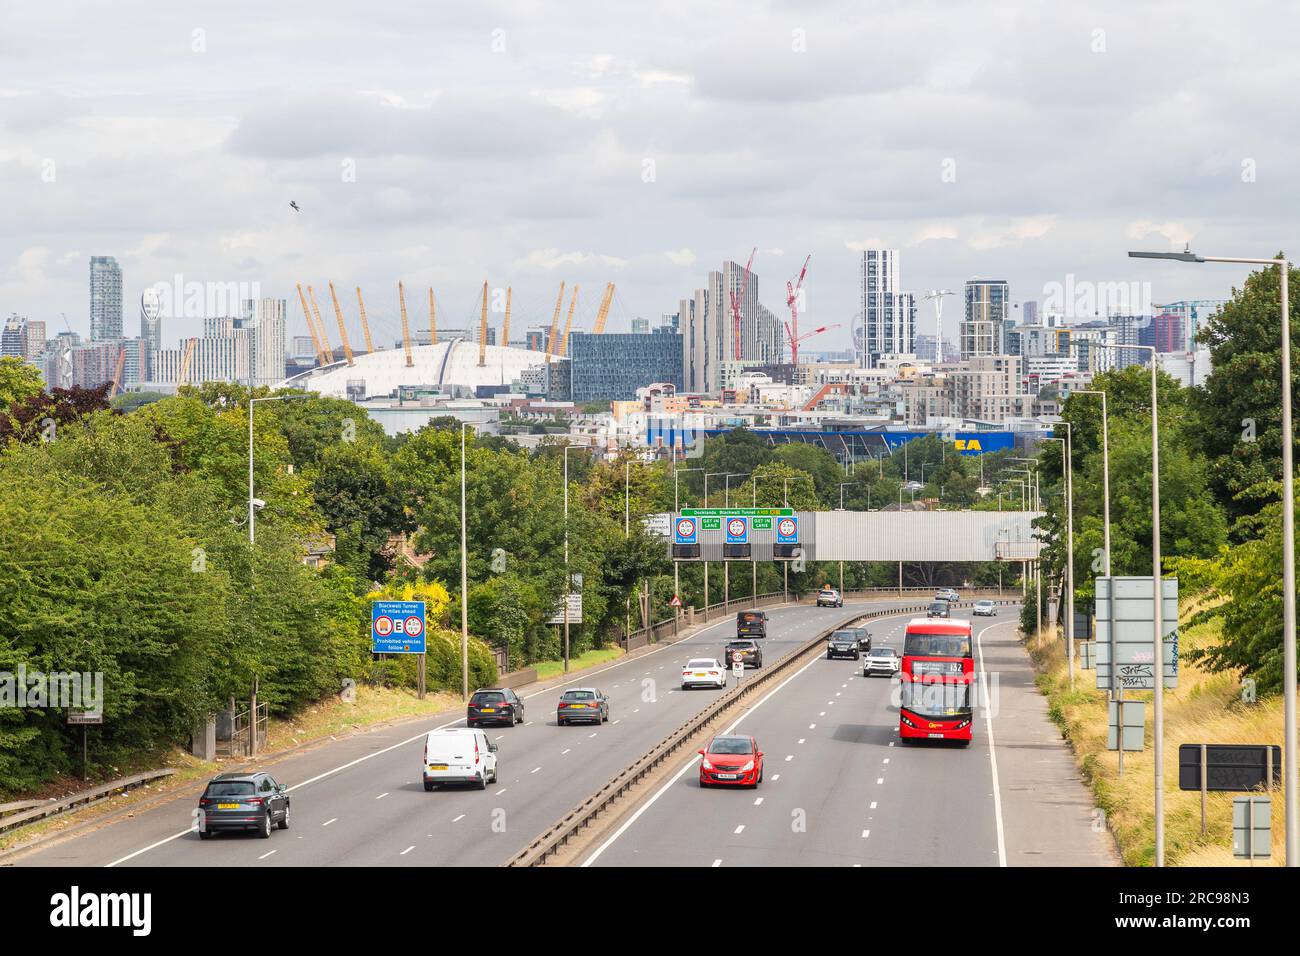 LONDON, UK - 13TH JULY 2023: Traffic on the A2 road in South East London connecting with the Black Wall tunnel. Part of the O2 dome can be seen. Stock Photo